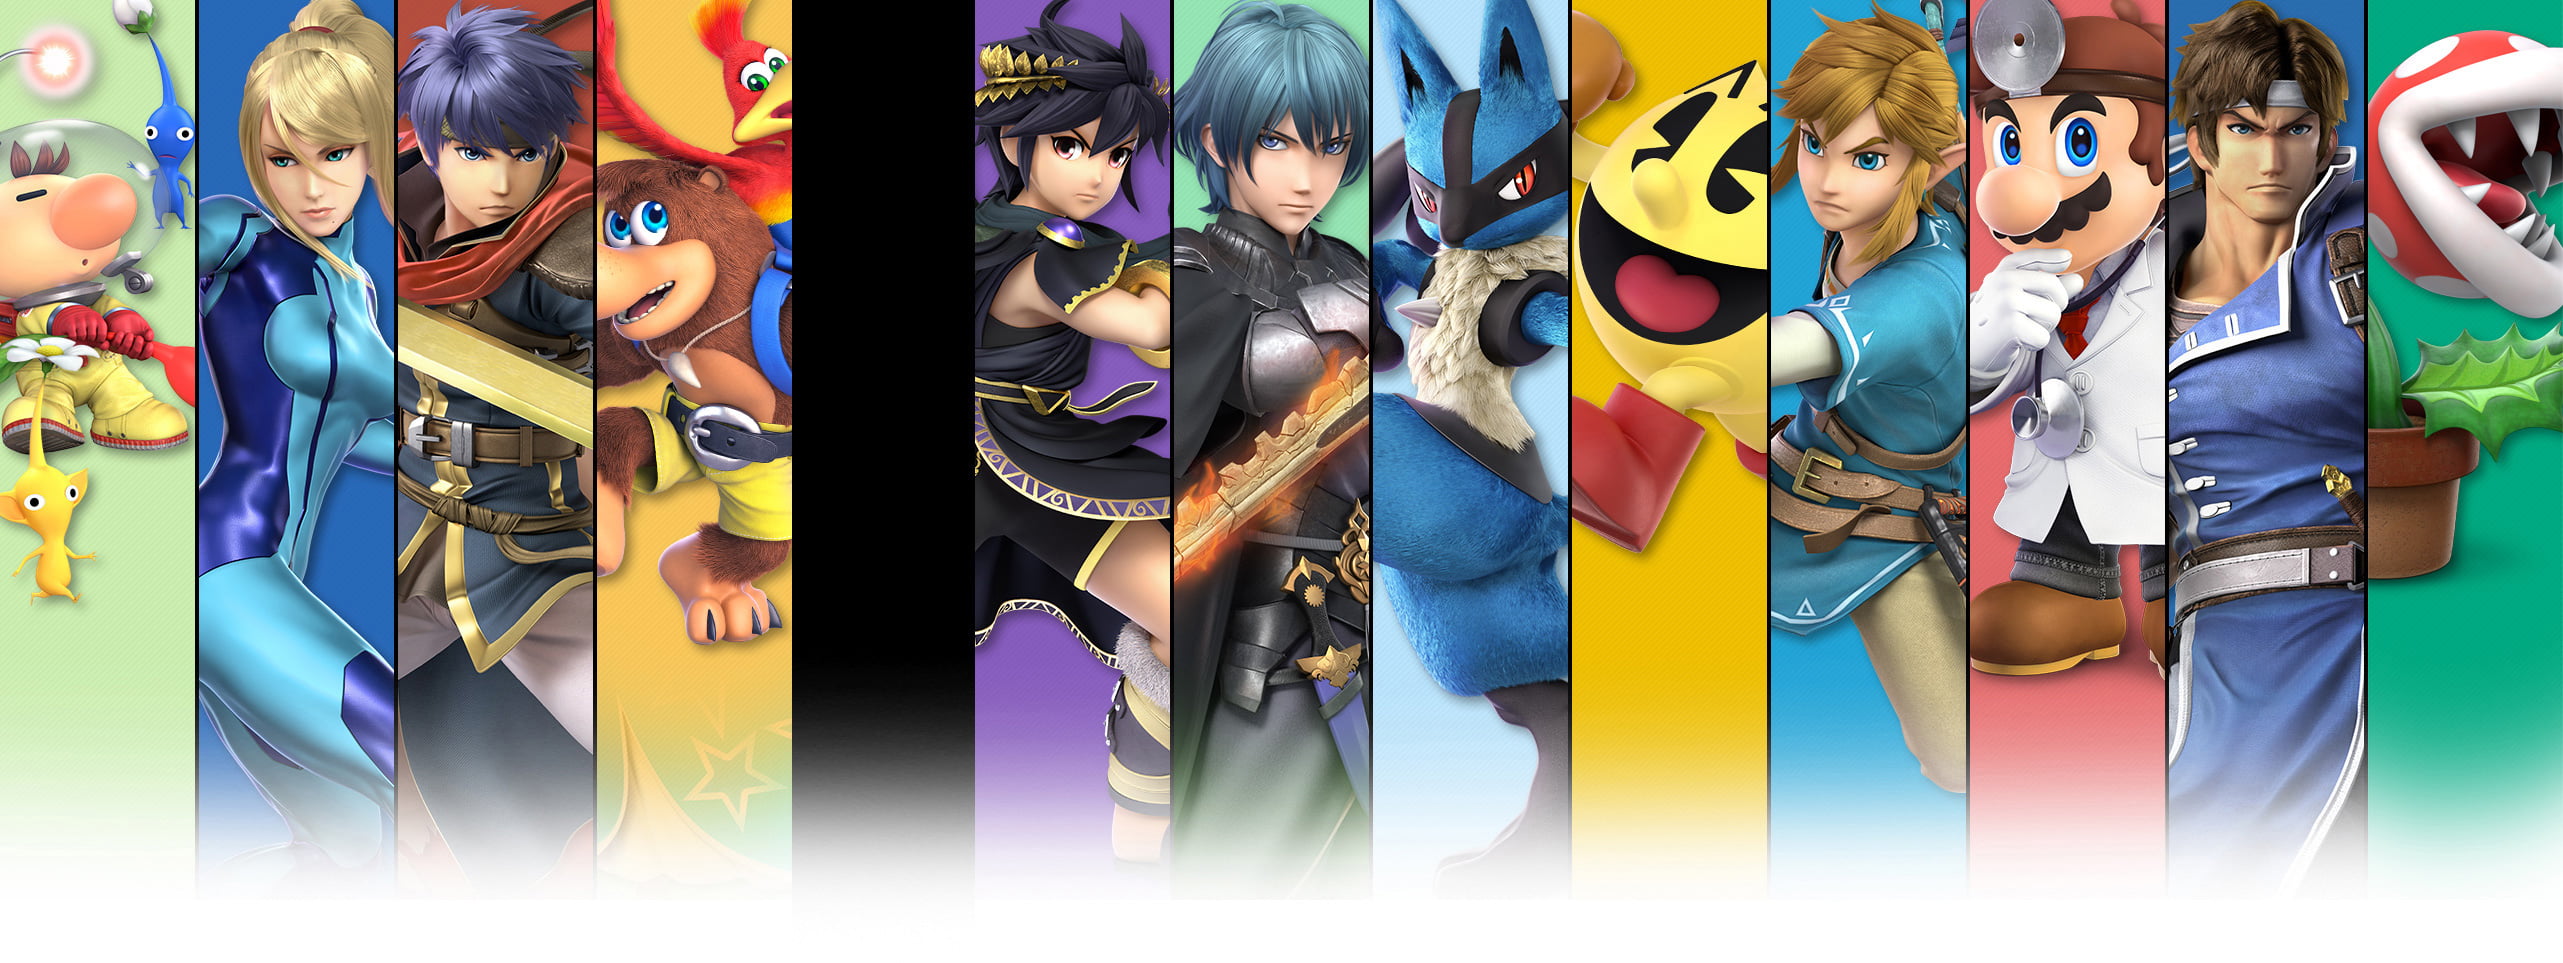 How many characters are in Super Smash Bros. Ultimate?